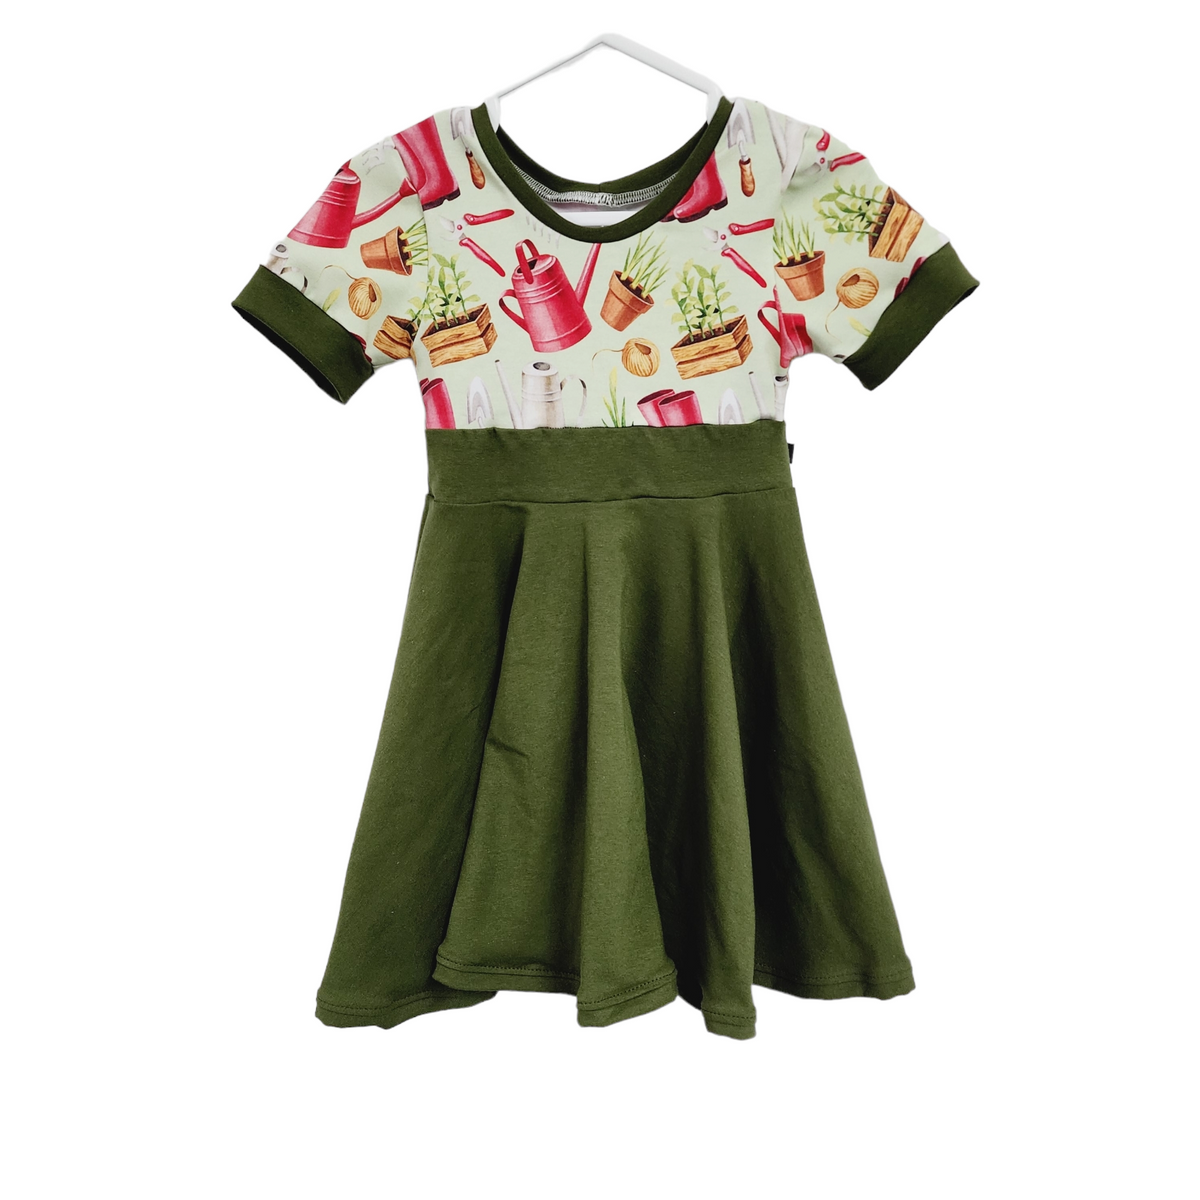 M3 Creations | Grow-with-me dress | Janette Jardine (ready to go)